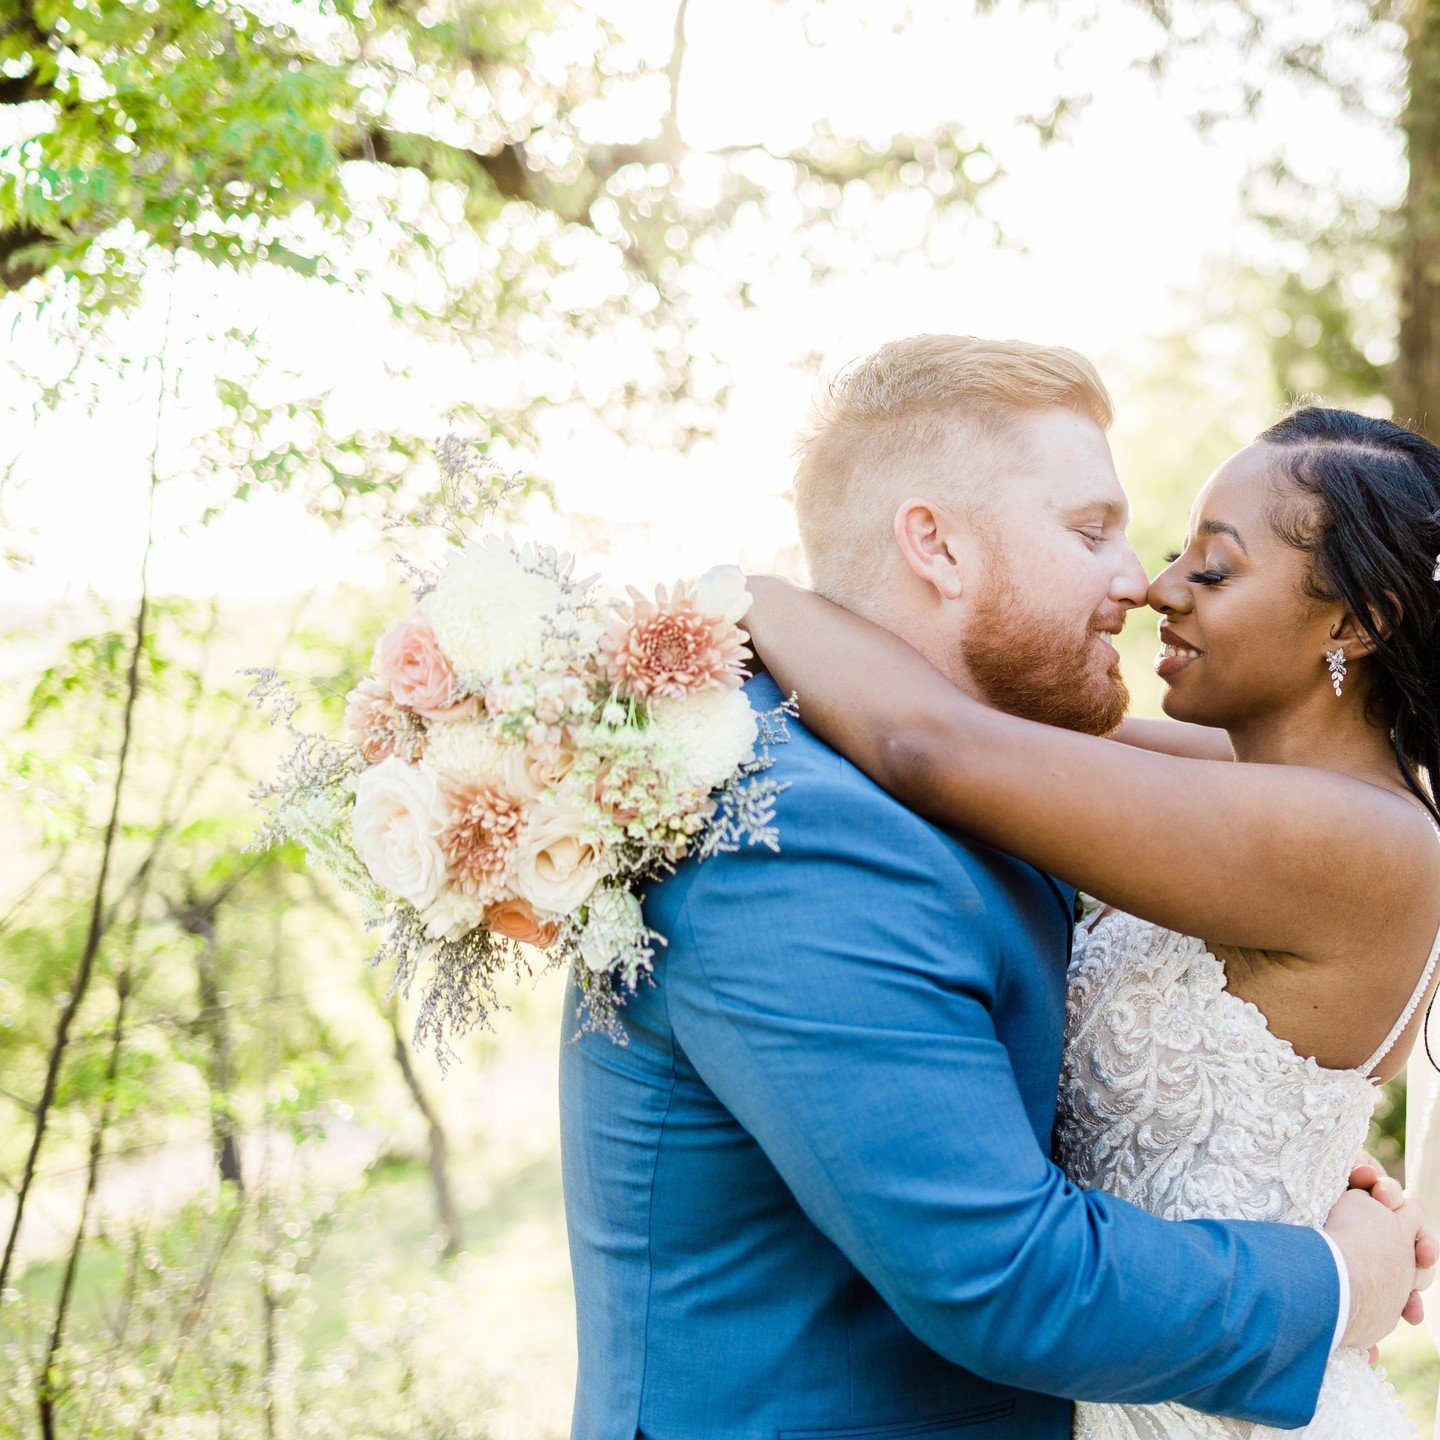 If you are in need of a sweet spring wedding inspo, we&rsquo;ve got you covered!

Photo: @rana_visuals 
Floral: @dreameventsaustin 

#texasweddingvenue #texasdestinationwedding #atxweddings #theknottexas #letsgetmarried #viewsfordays #allinclusivewed